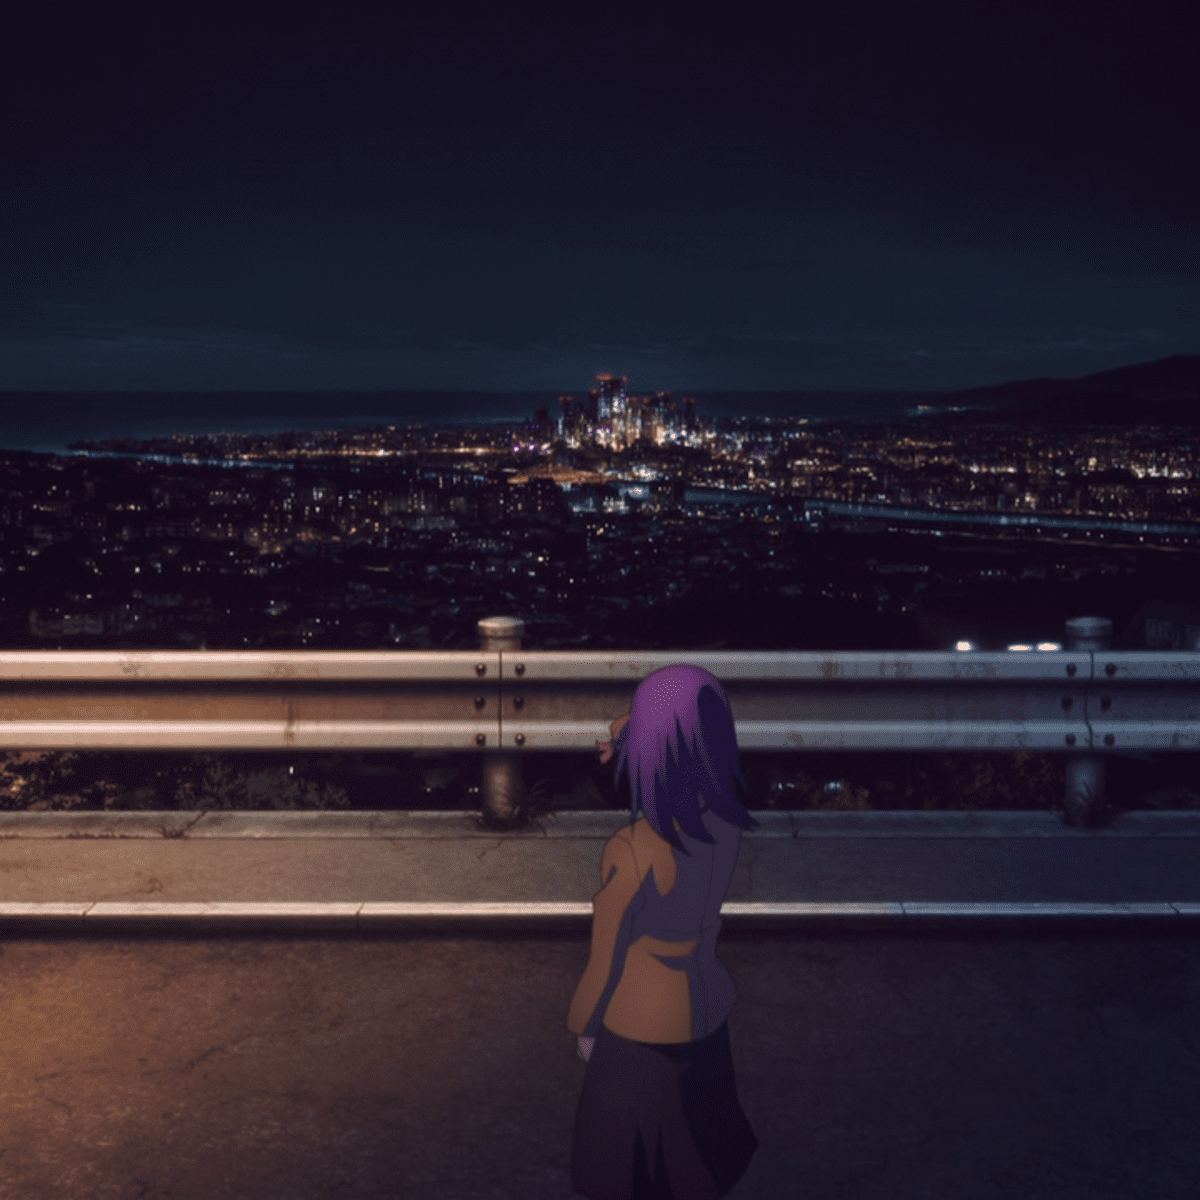 Anime Review: Fate/stay night – Pastime Viewpoints